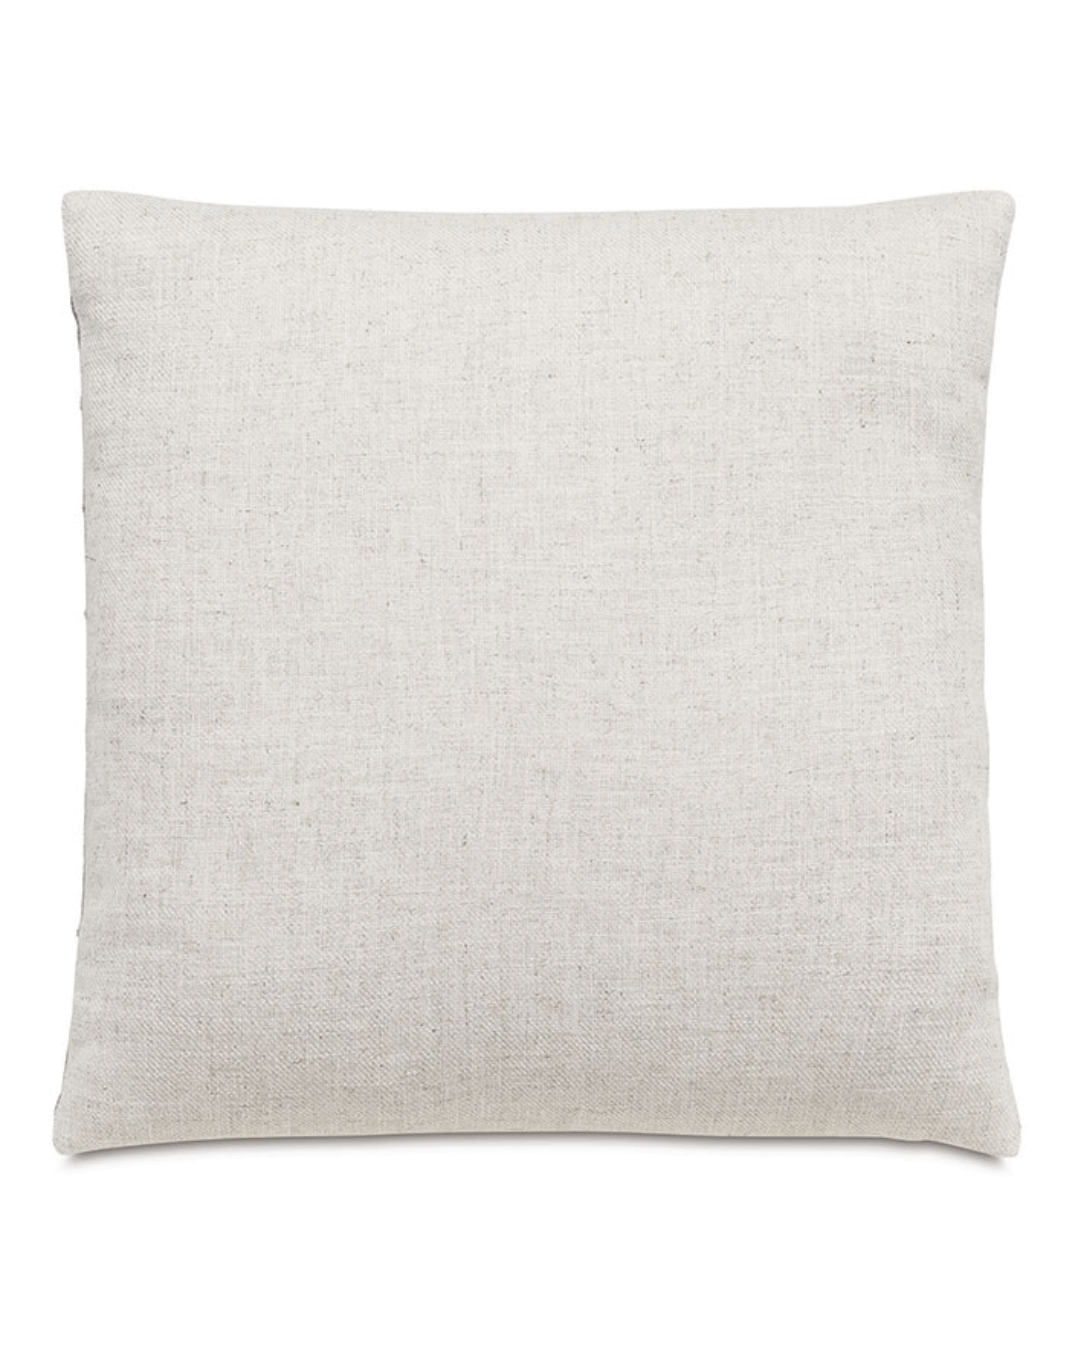 Clear Dotted Pillow